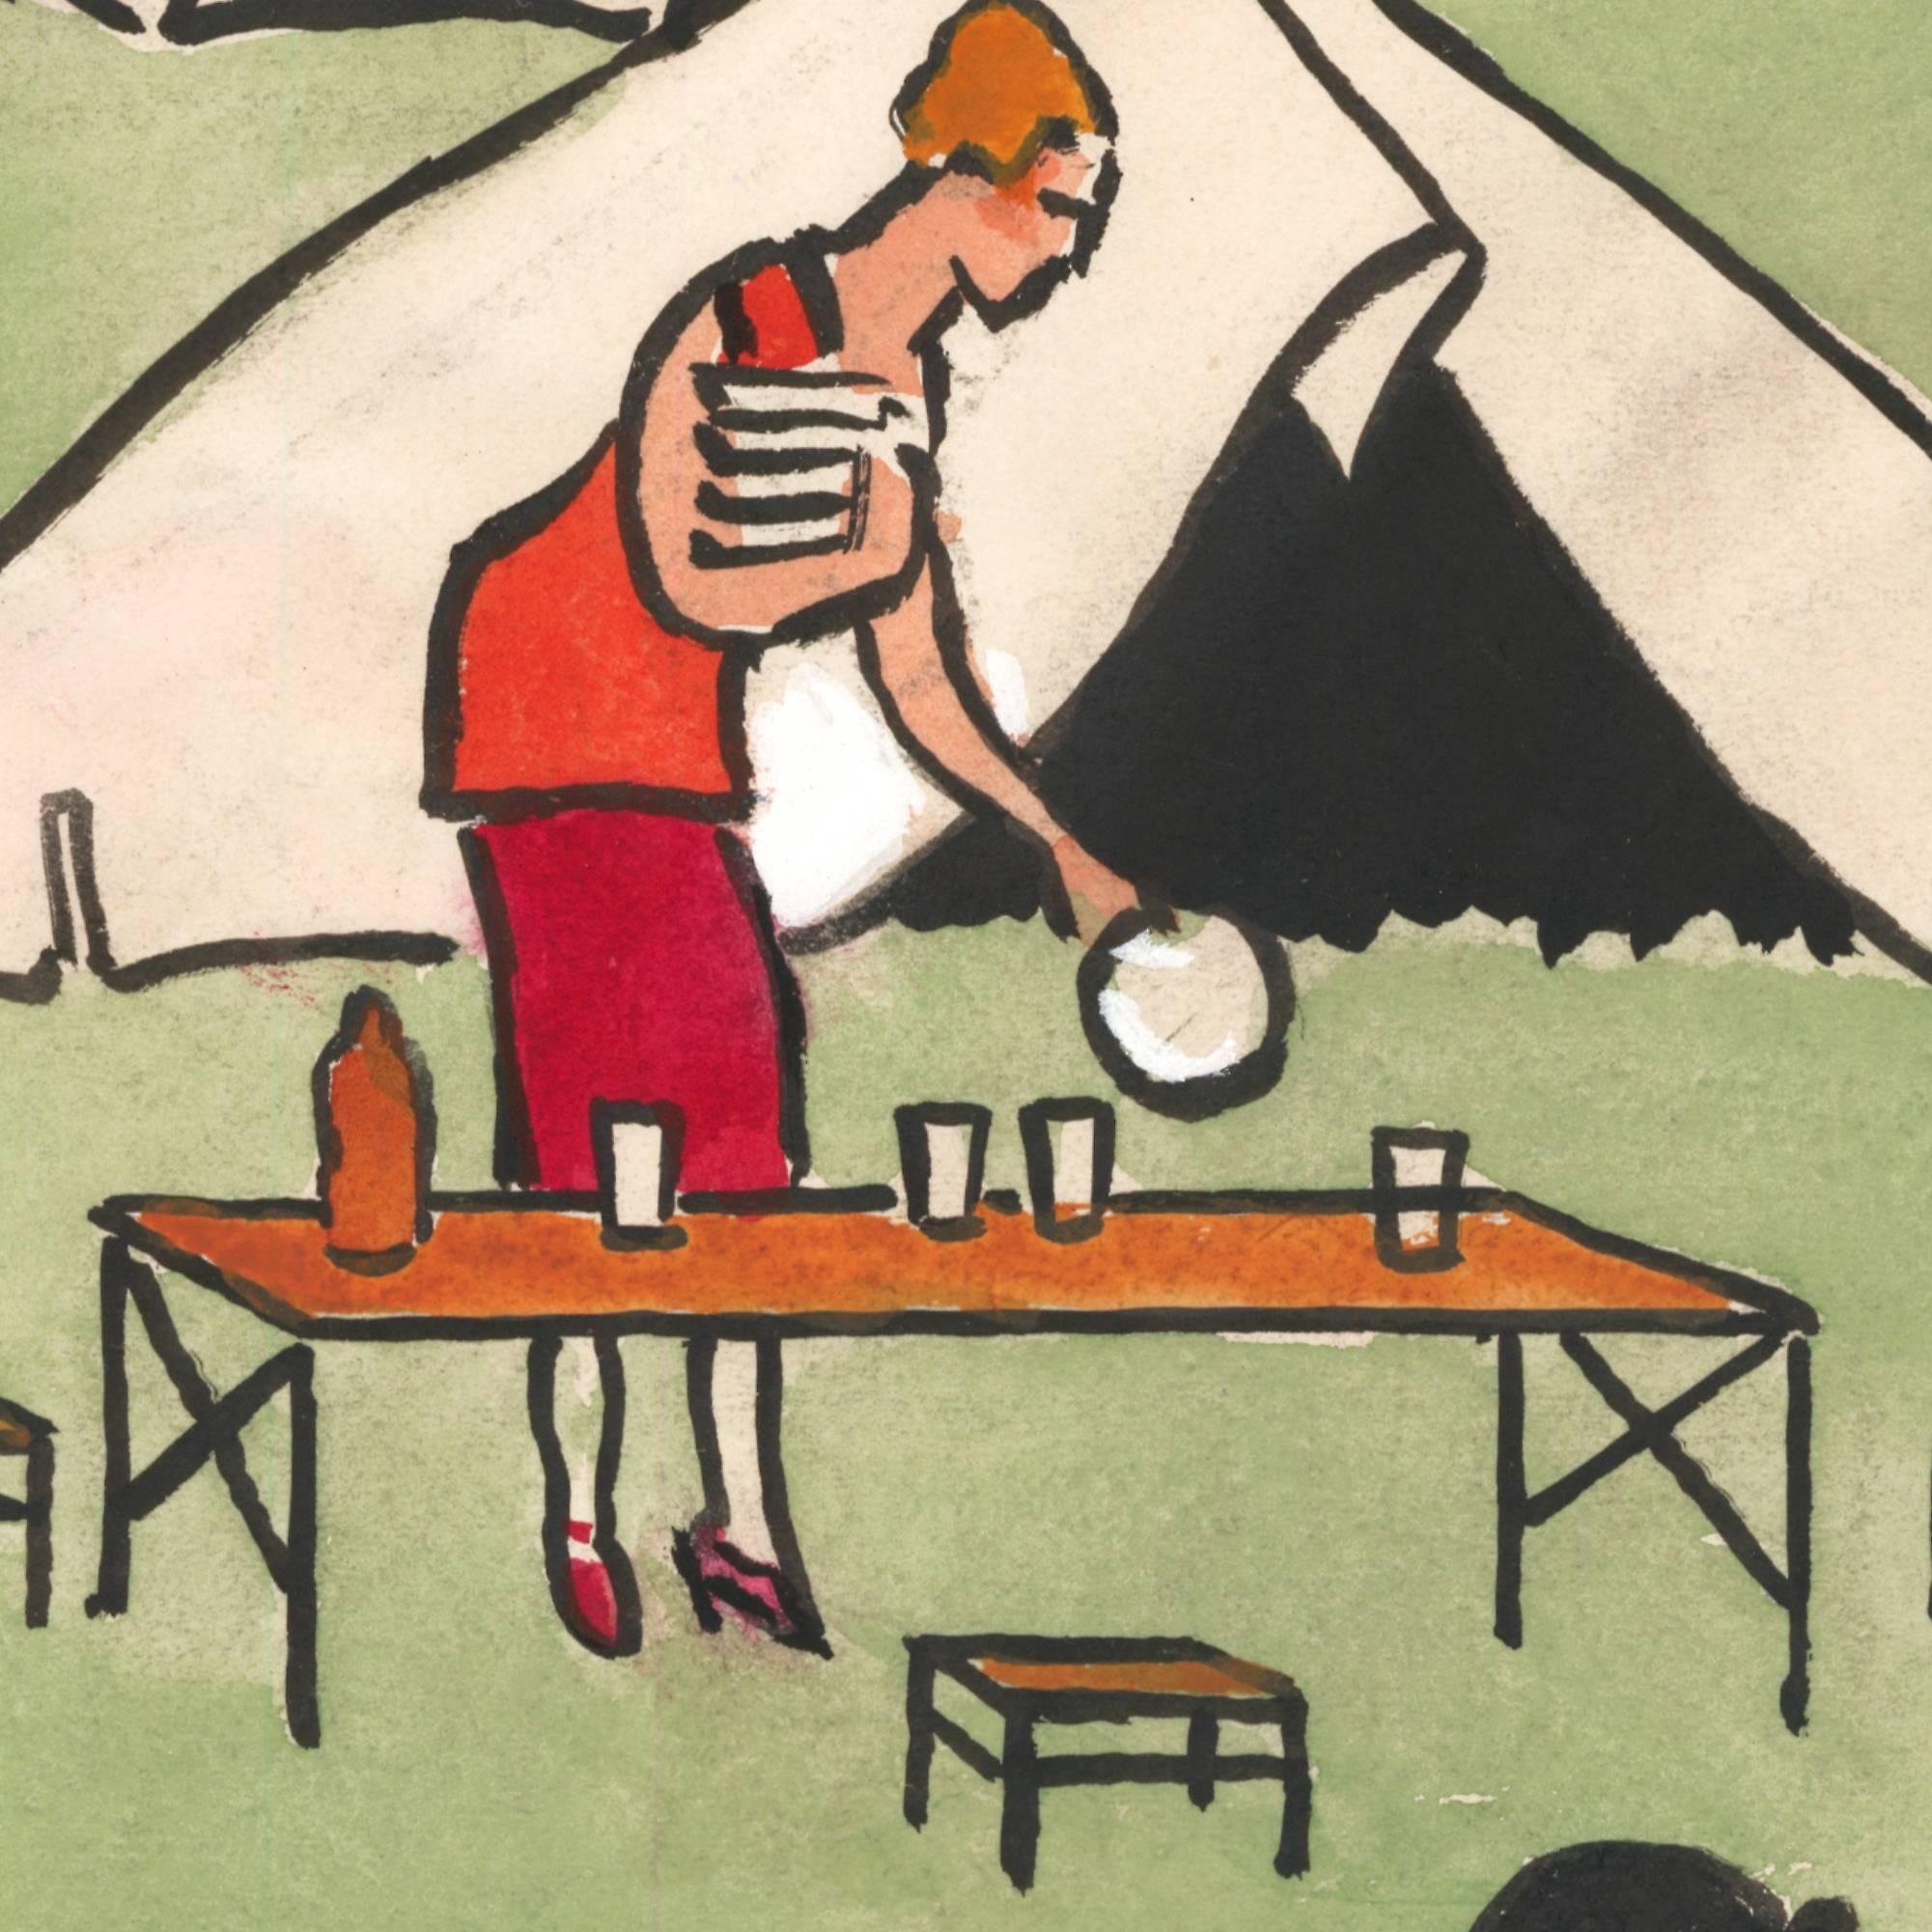 Original gouache on paper of people camping, likely in the French Alps, circa 1935. Signed at lower right 